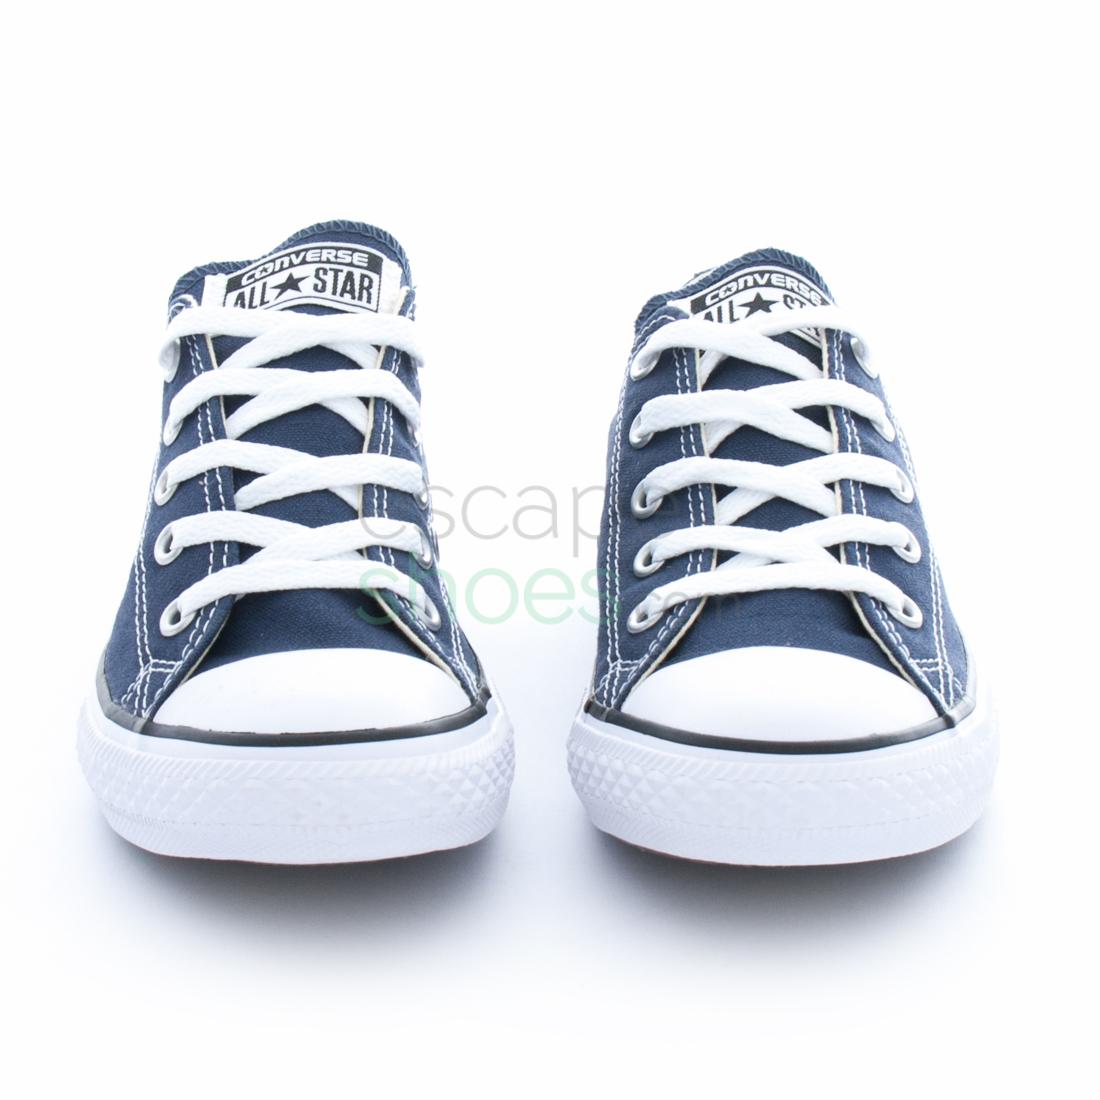 Sneakers CONVERSE Chuck Taylor All Star 3J237C 410 Ox Navy Blue